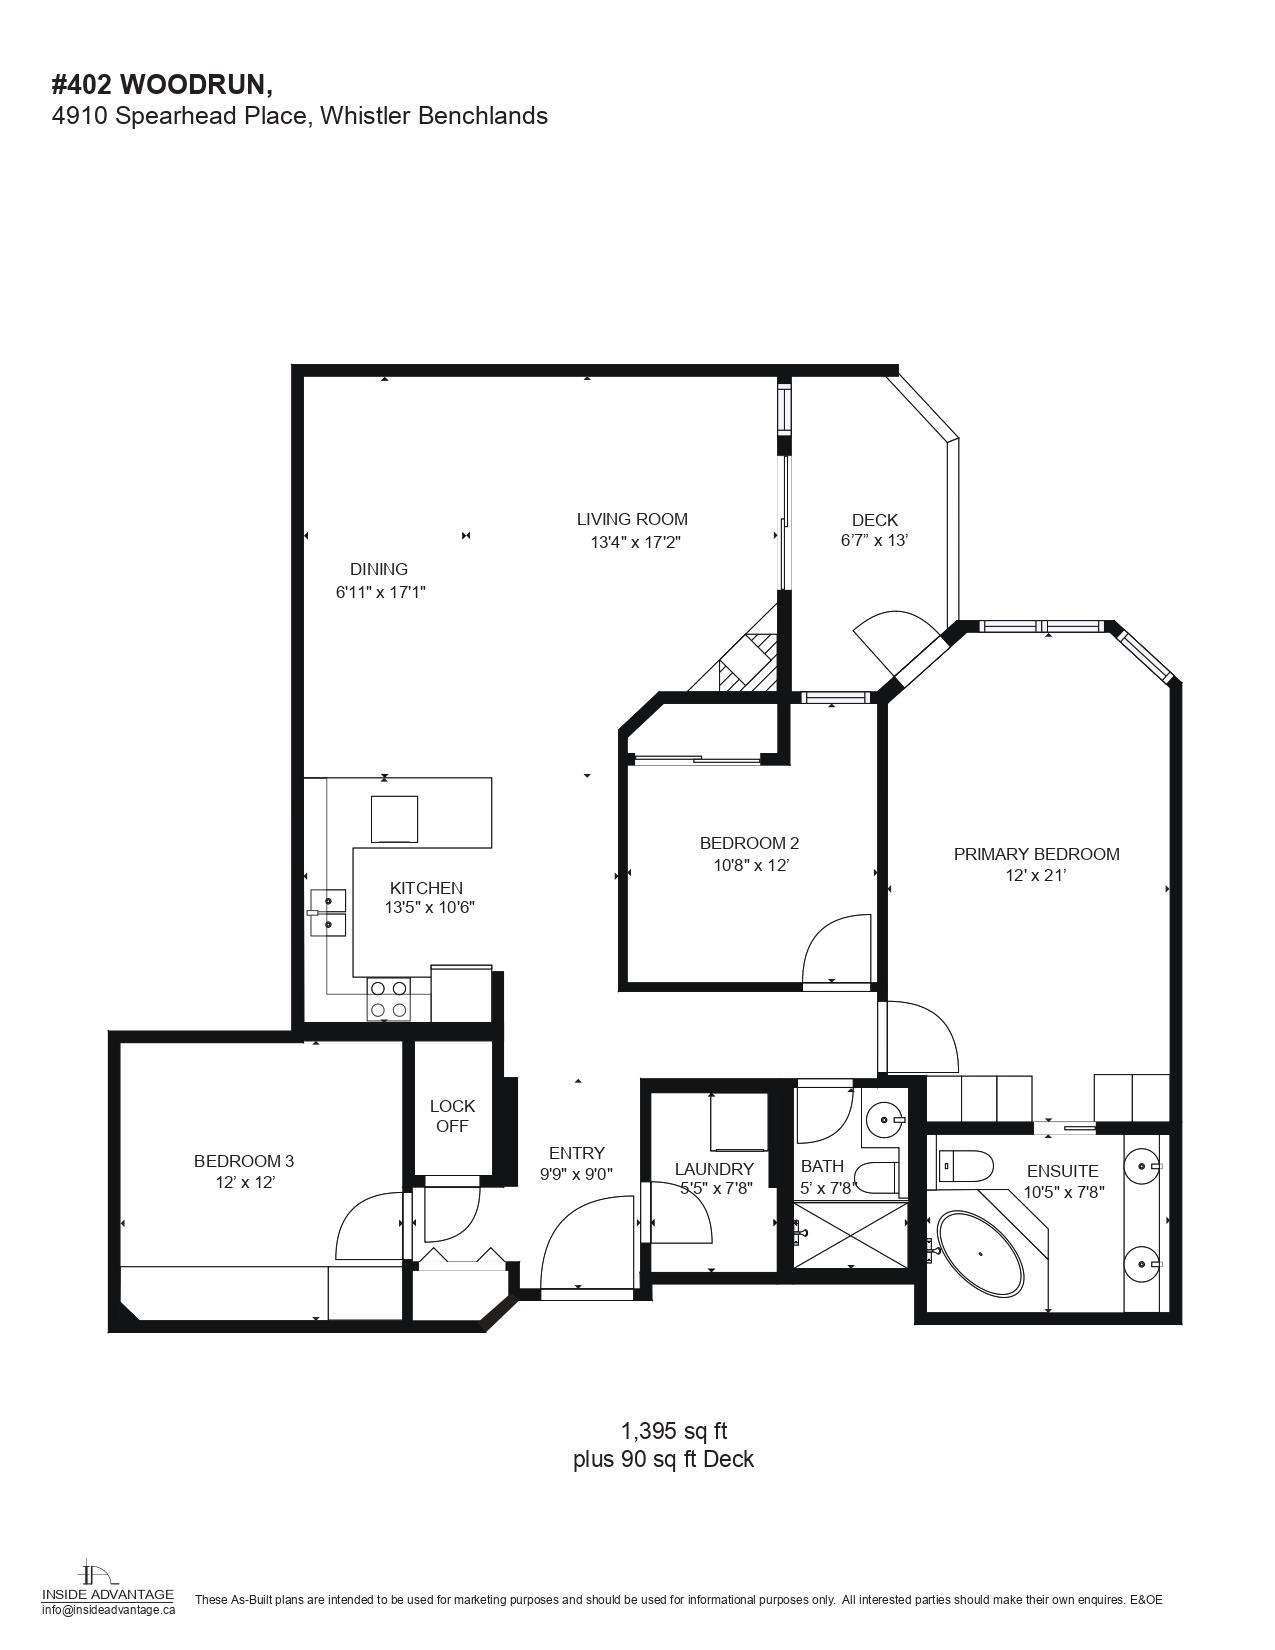 Listing image of 402 4910 SPEARHEAD PLACE